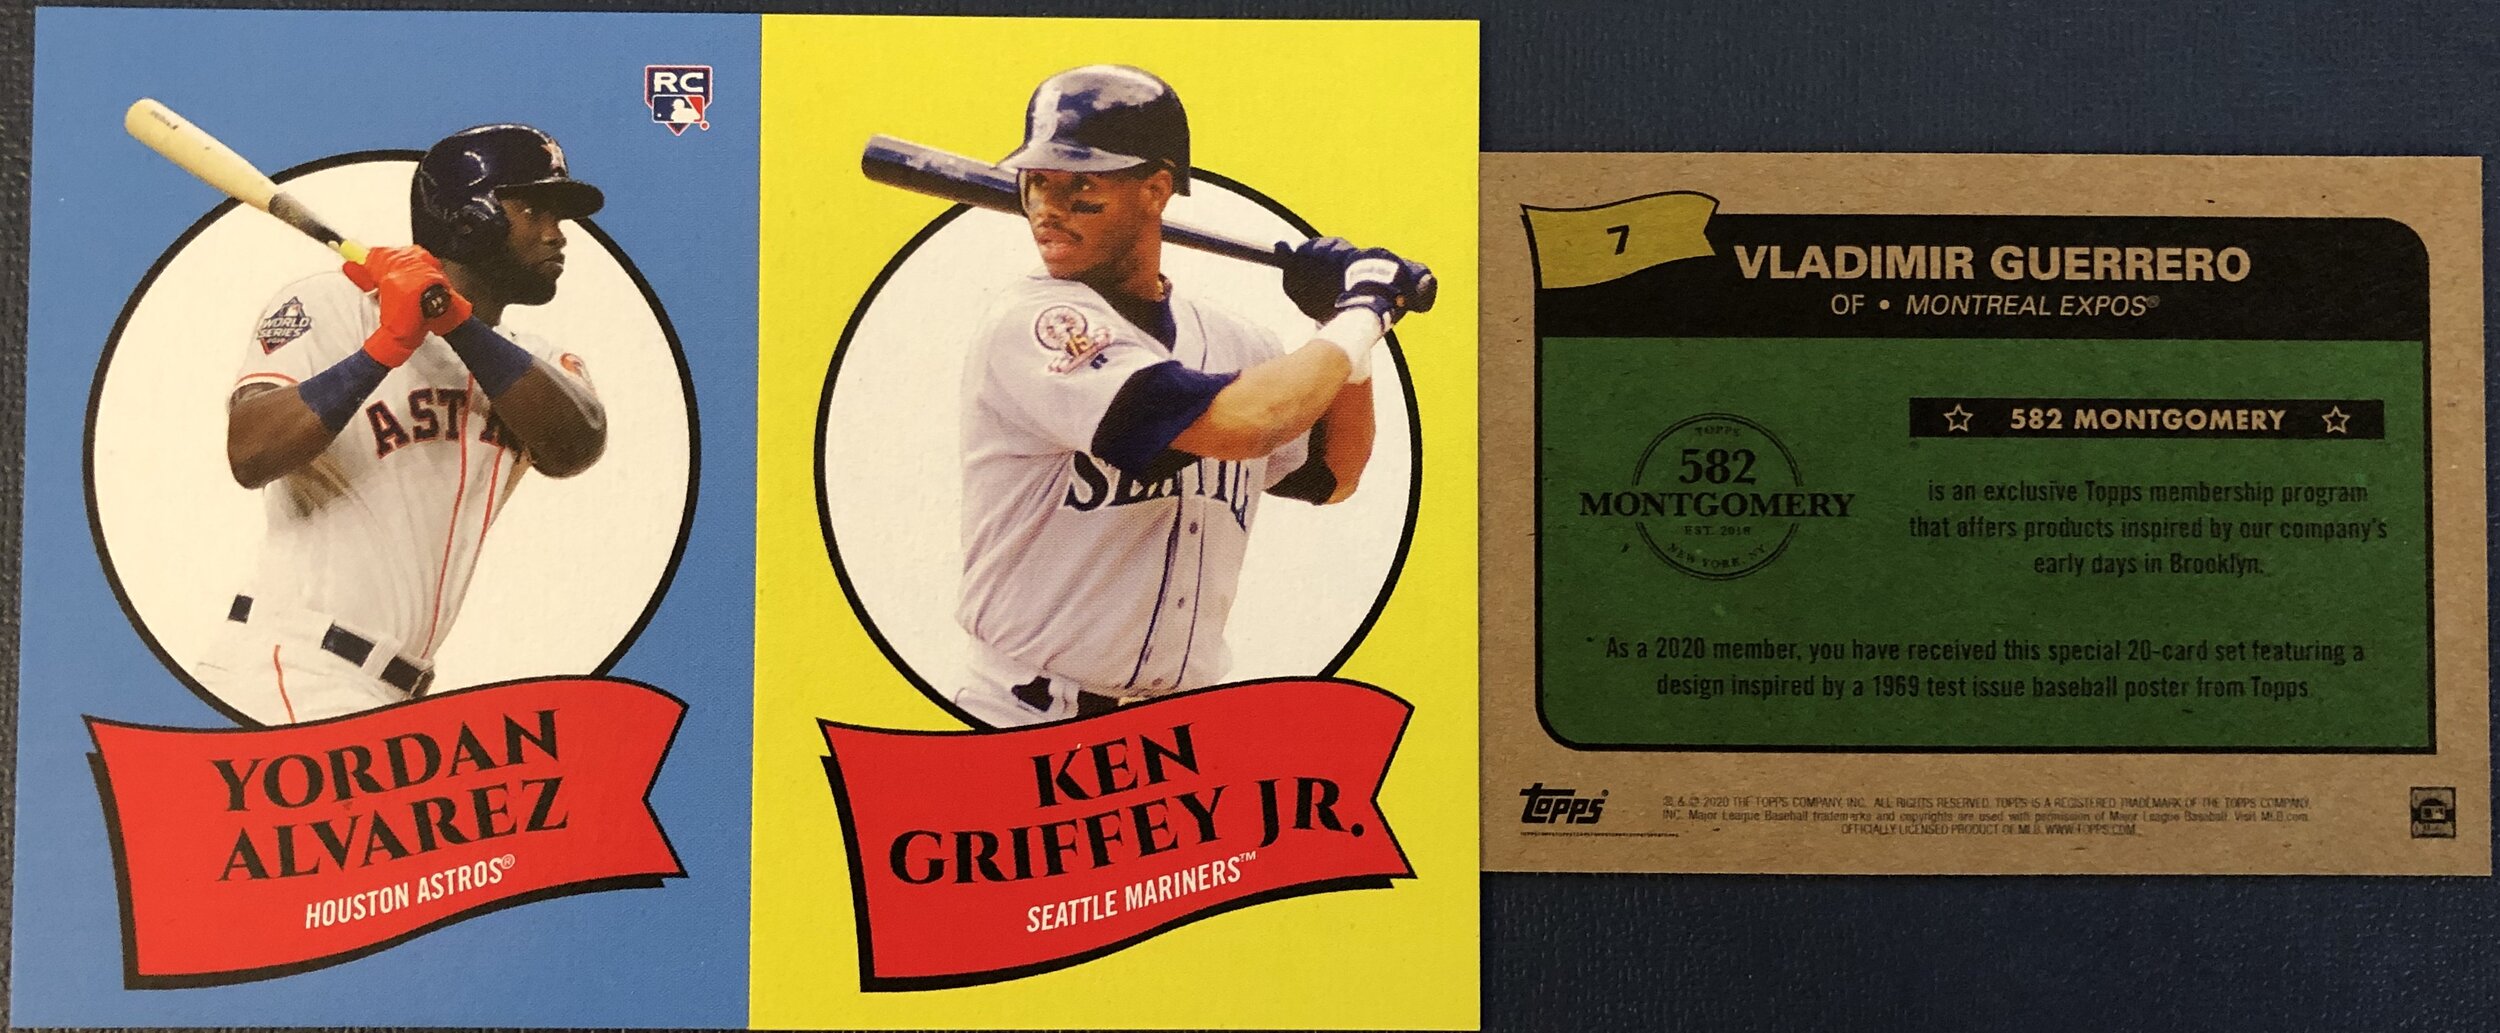 2020 Topps 582 Montgomery Club Set 3 Review and Checklist — WaxPackHero